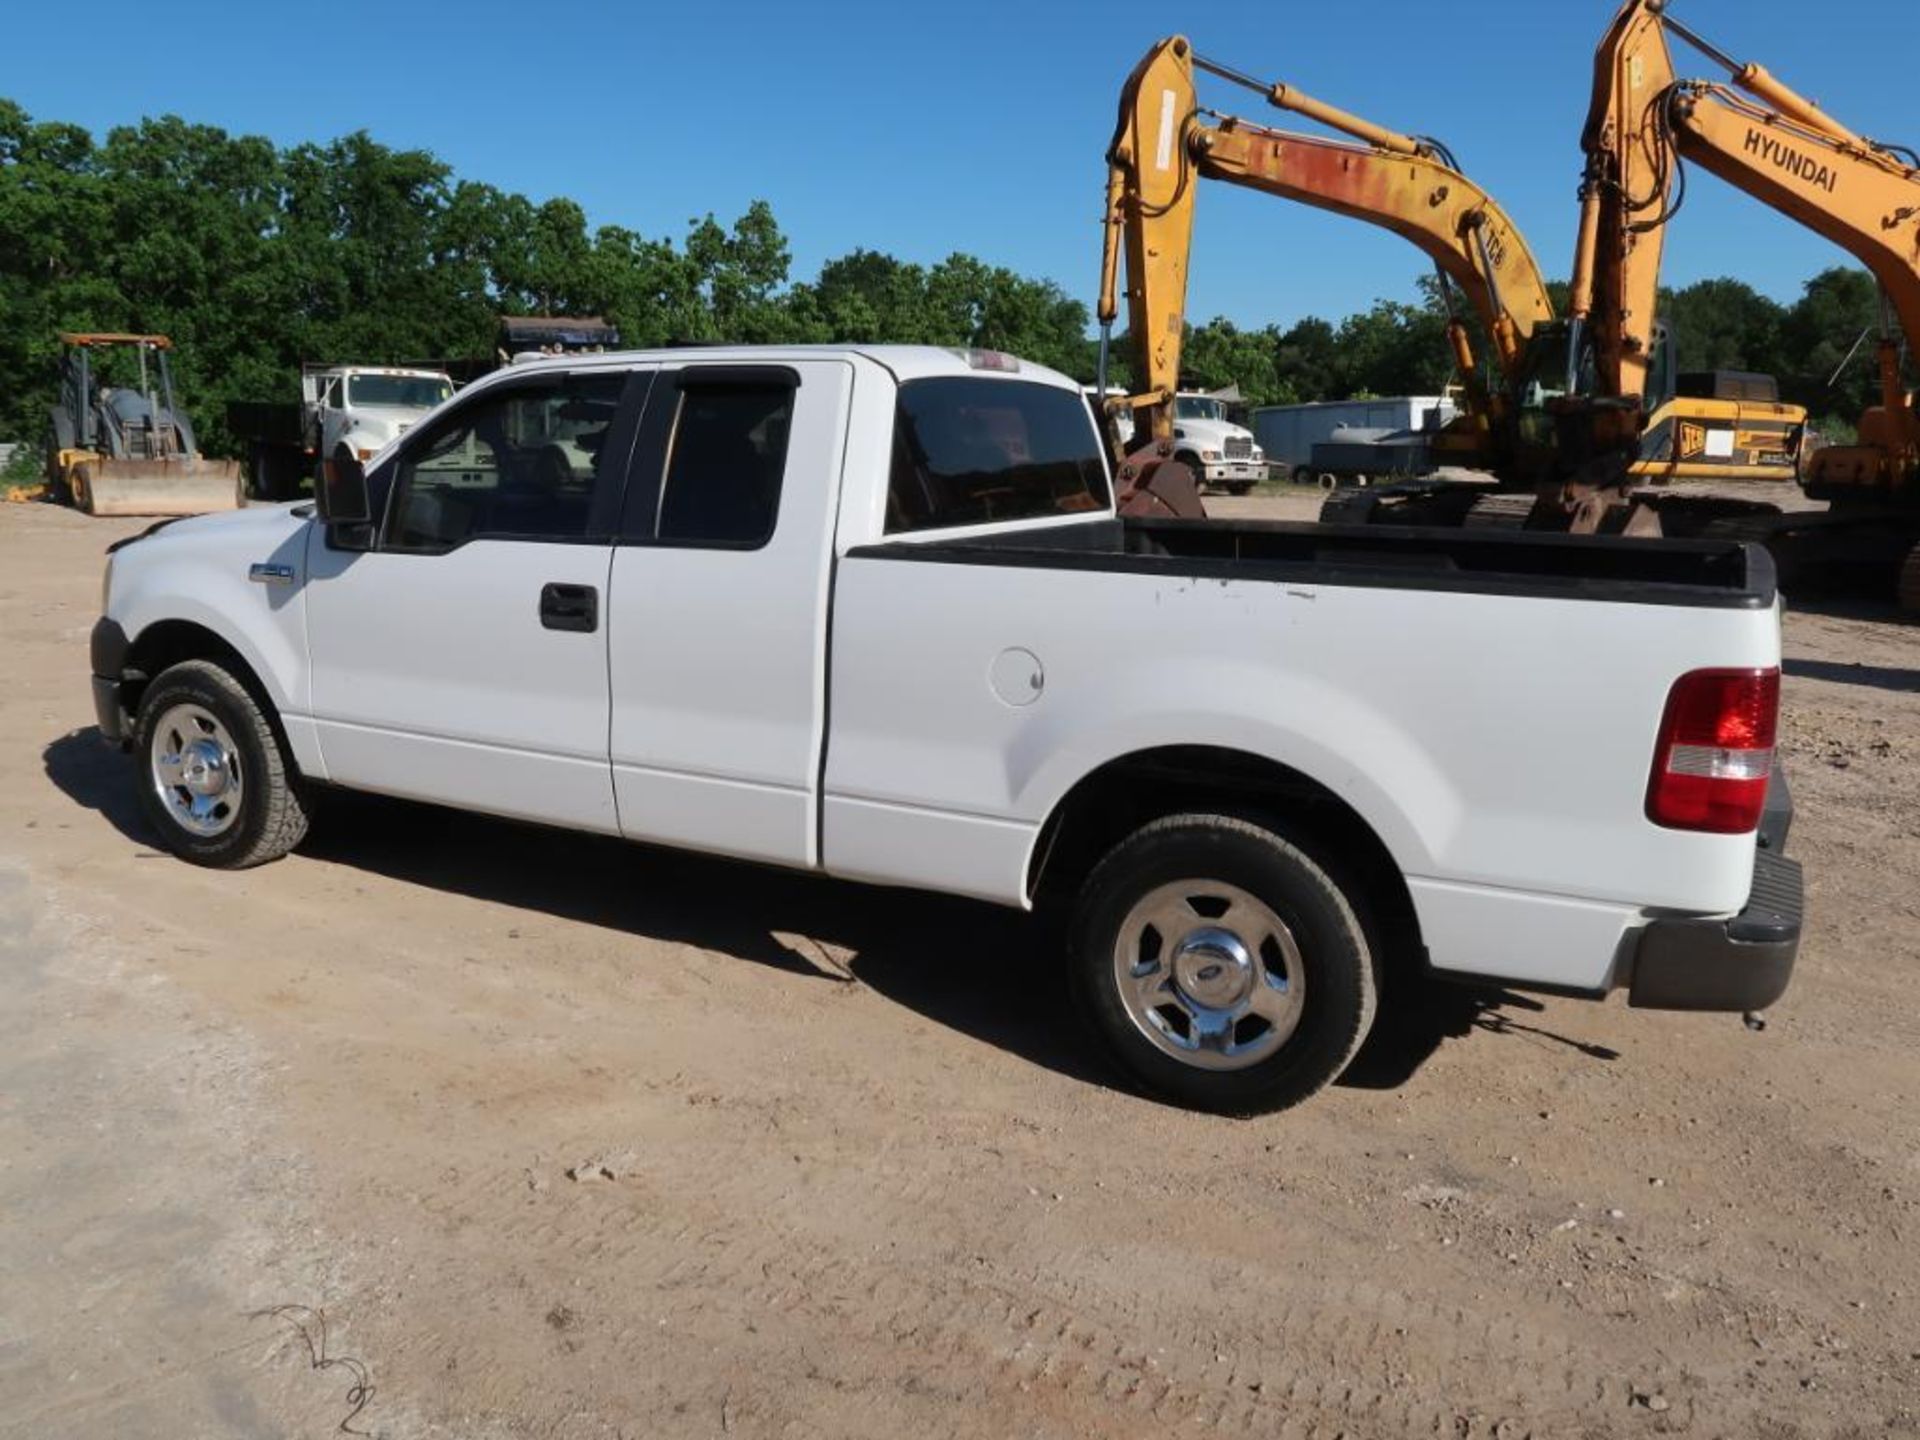 2007 Ford Pick-up Truck Model F-150, VIN 1FTRX12W57FA57103 - Image 2 of 4